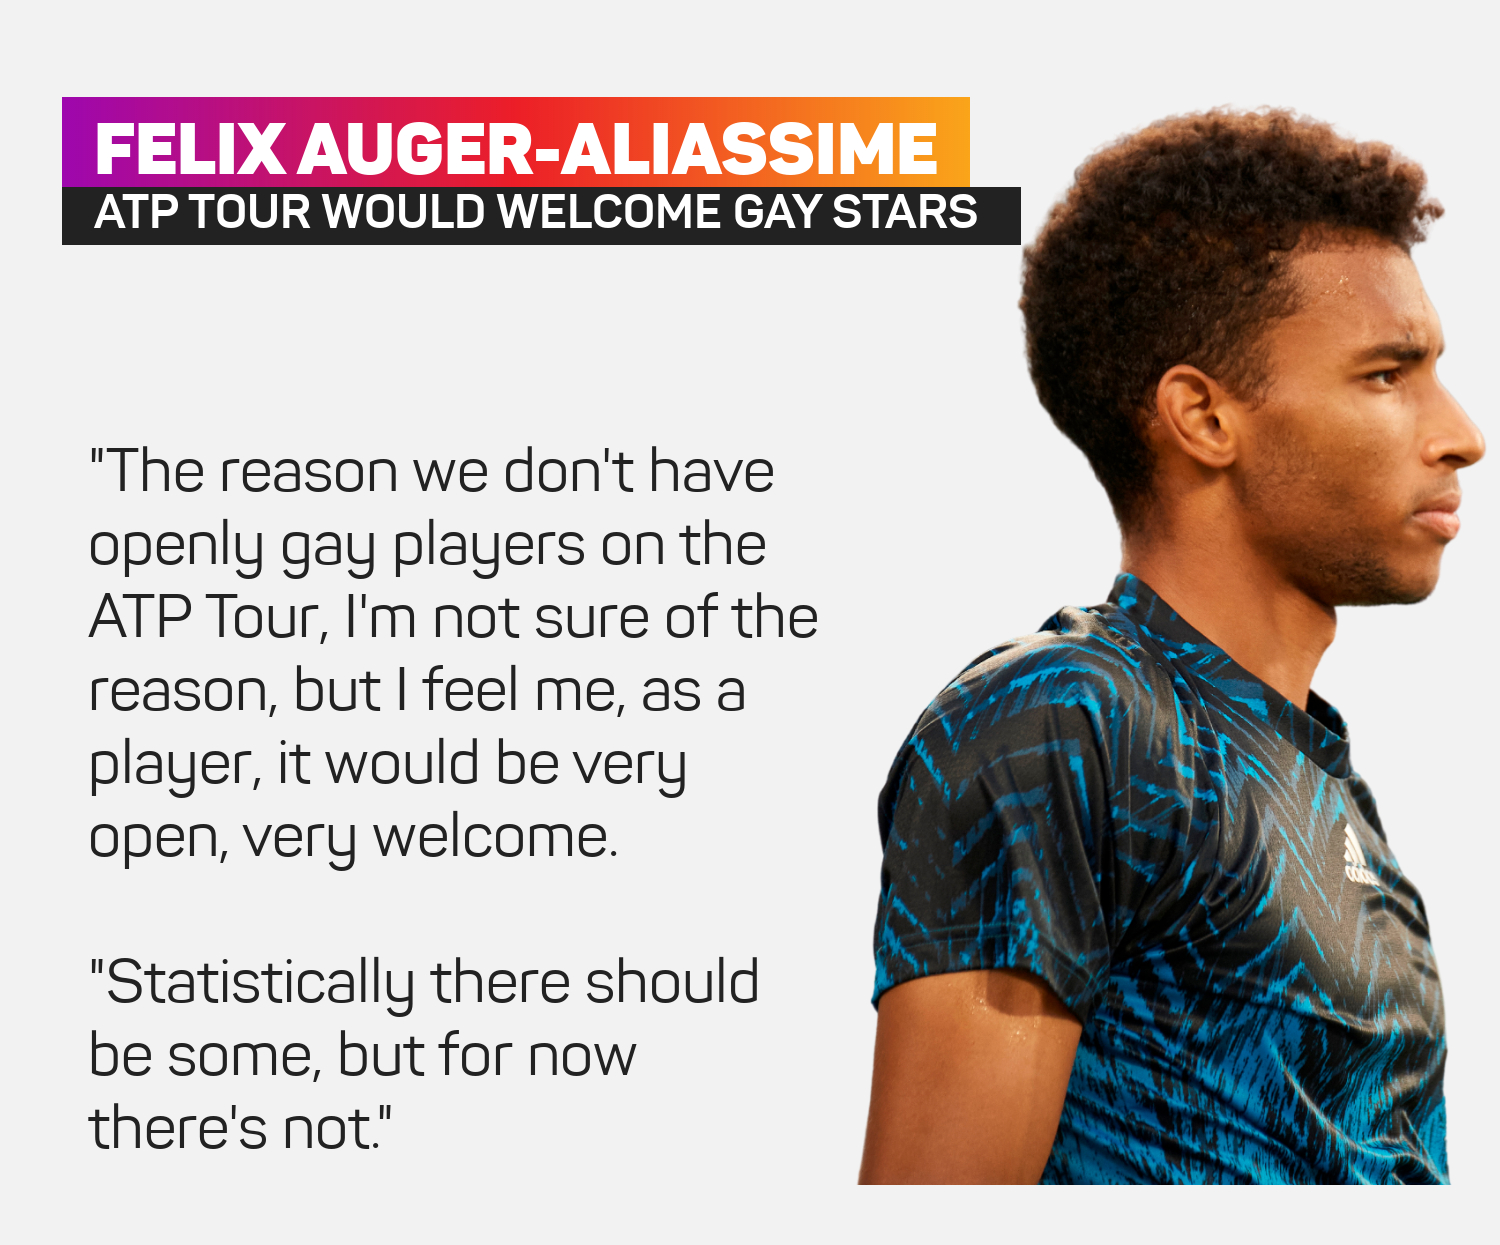 Felix Auger-Aliassime had his say at the US Open